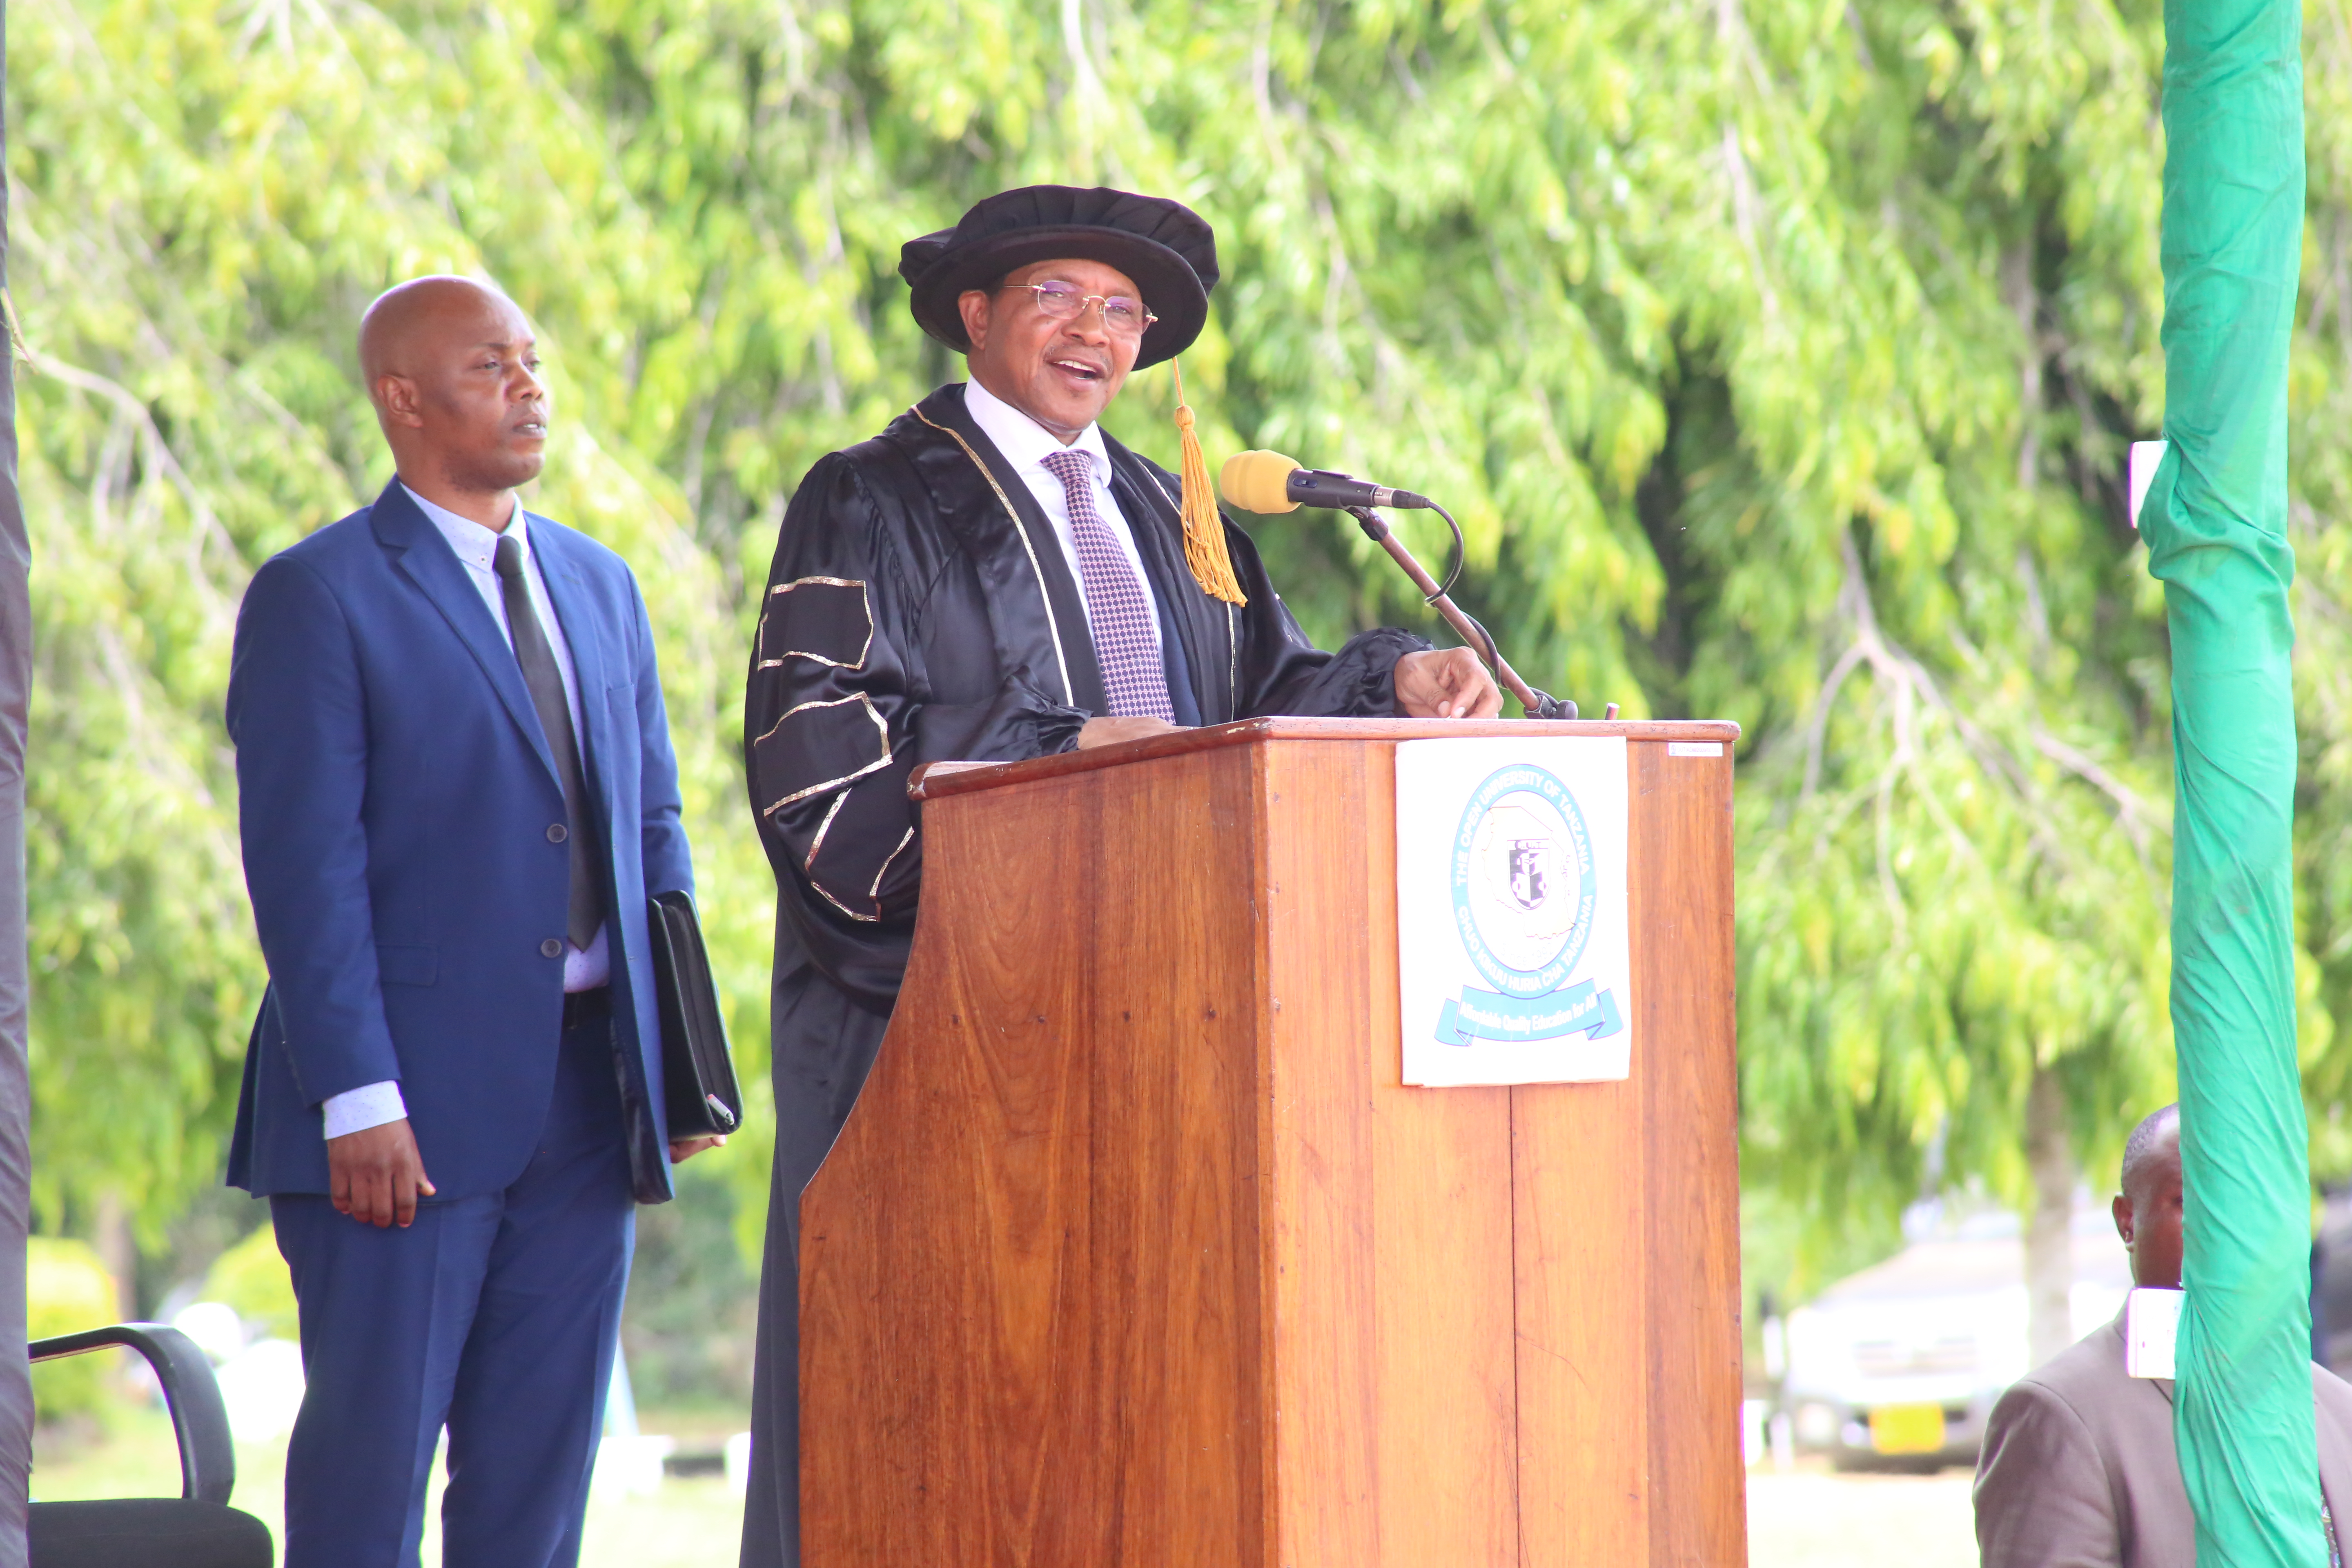 Former President of the United Republic of Tanzania Hon. Dr. JakayaKikweteaddressing  at the 37th graduation ceremonyof the Open University of Tanzania held on 28th September 2019 at Bungo, Kibaha